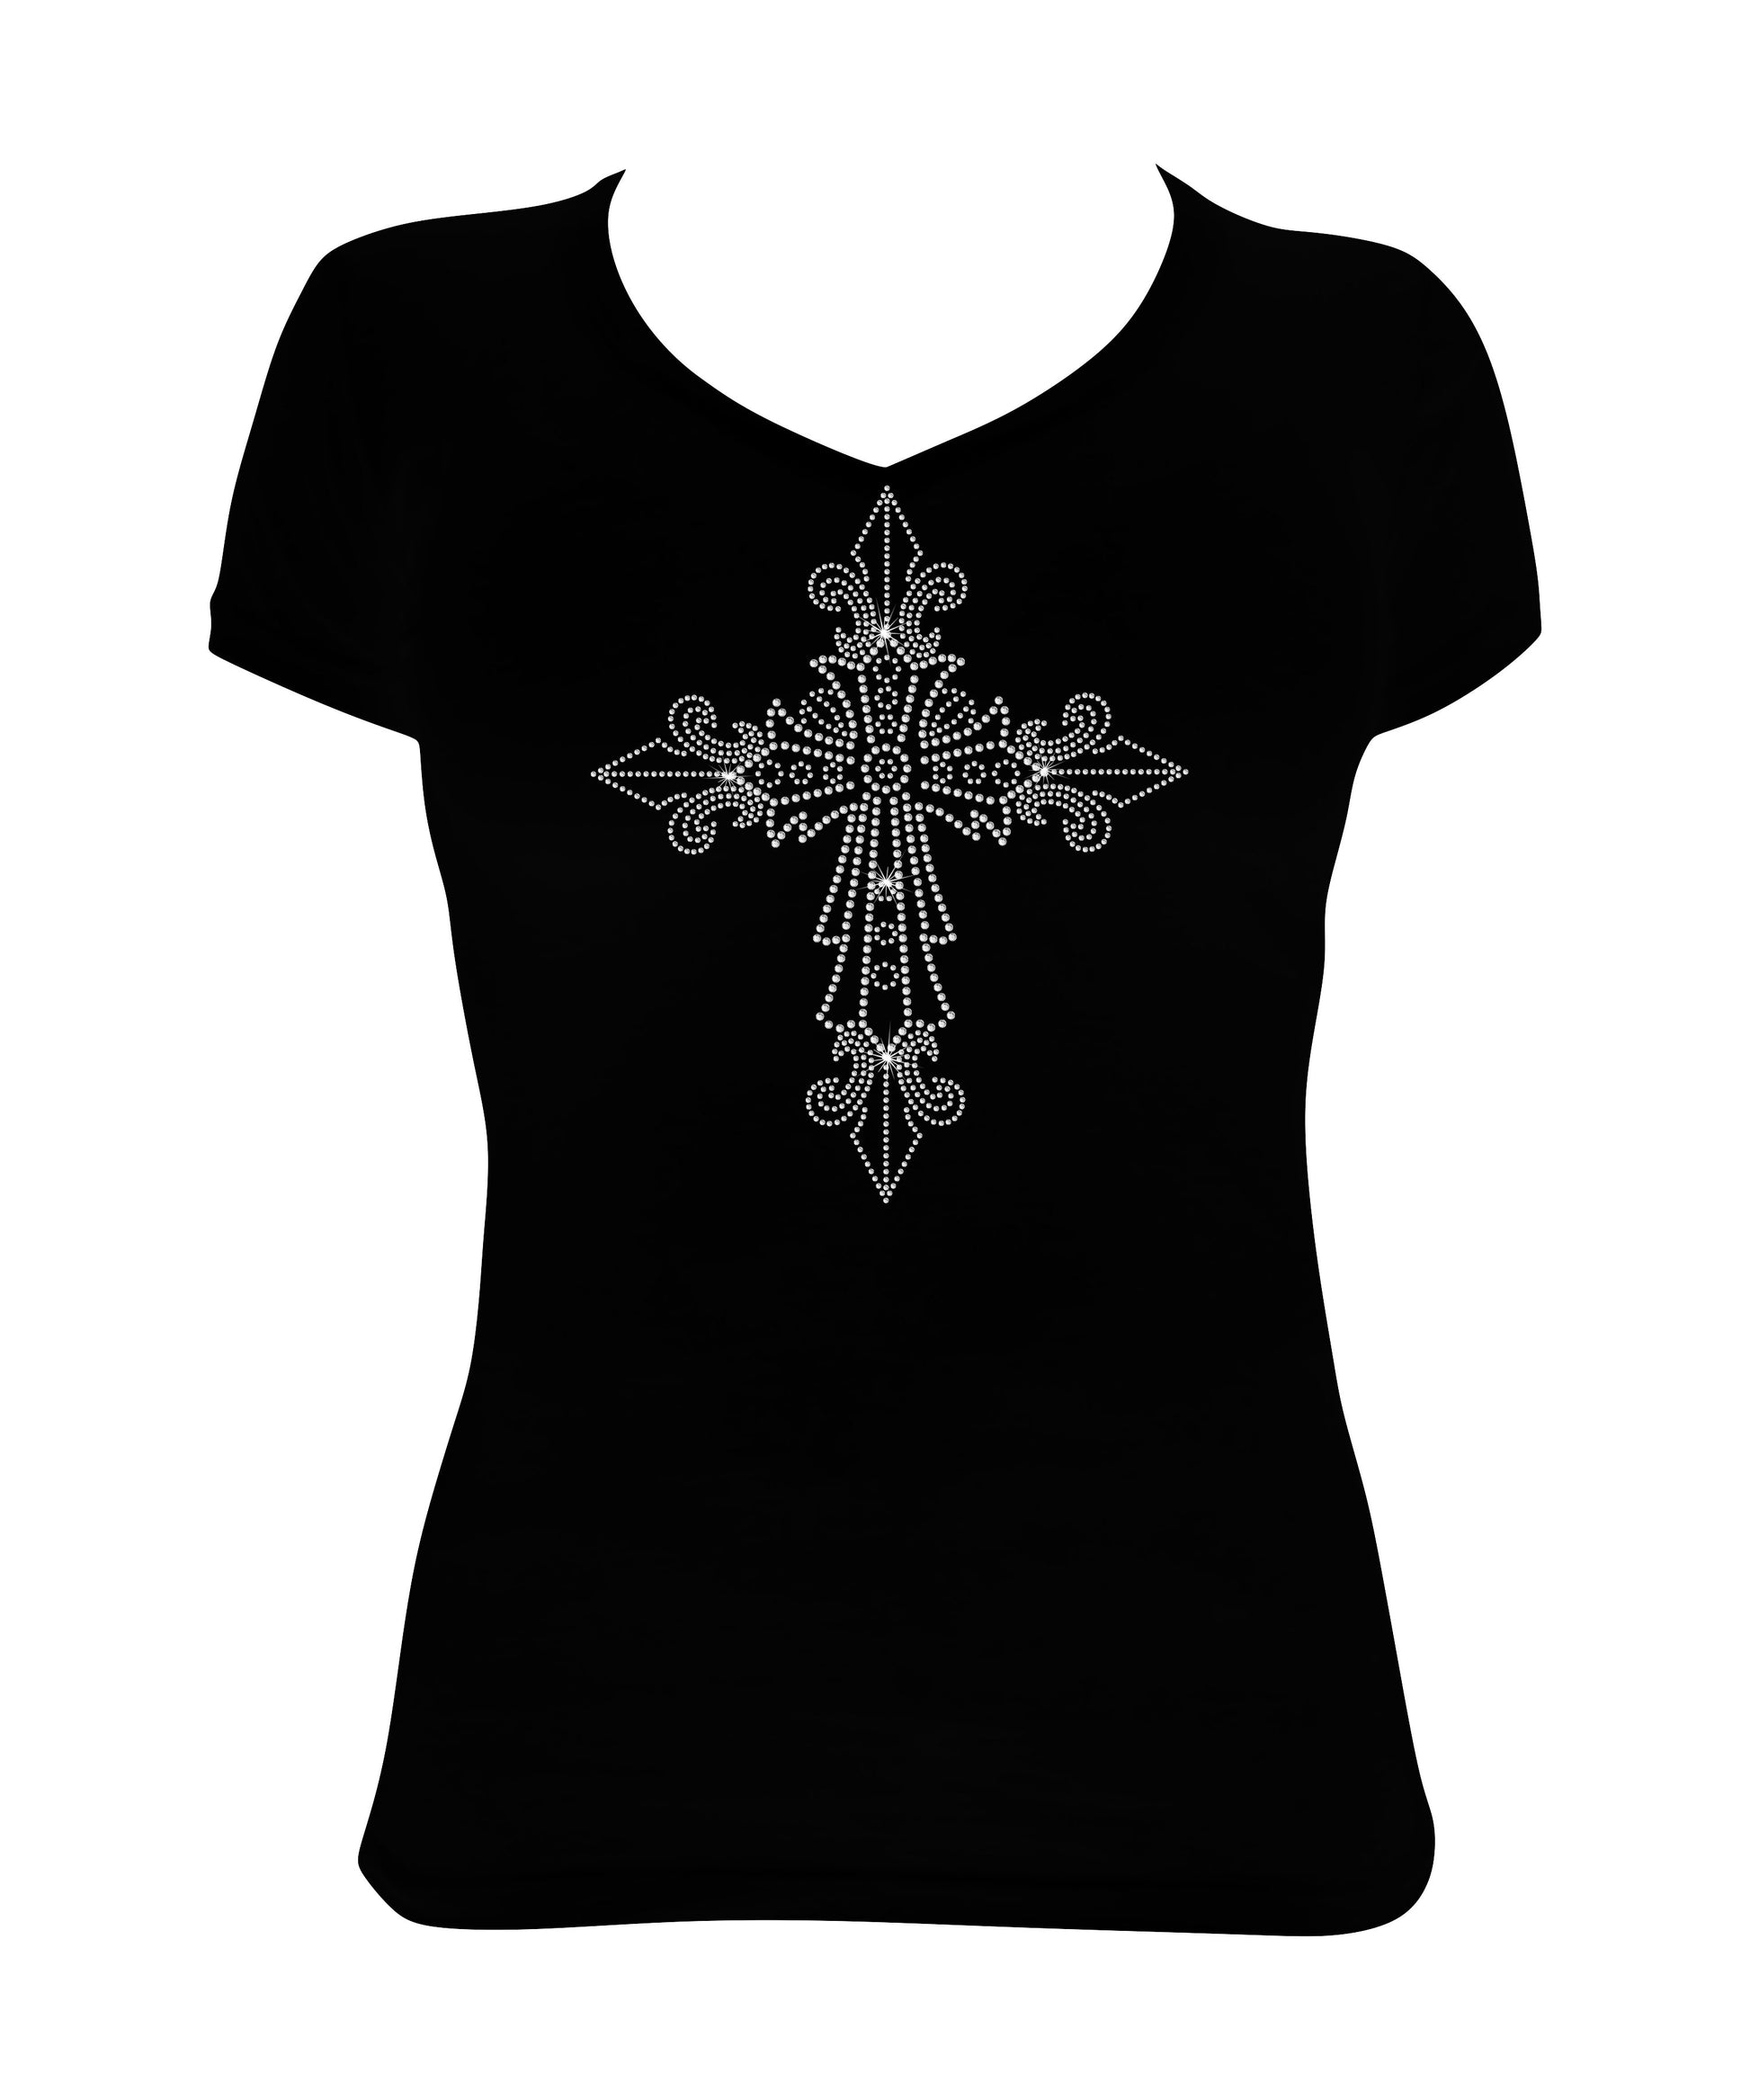 Women's Rhinestone Fitted Tight Snug Shirt Pointed Crystal Cross